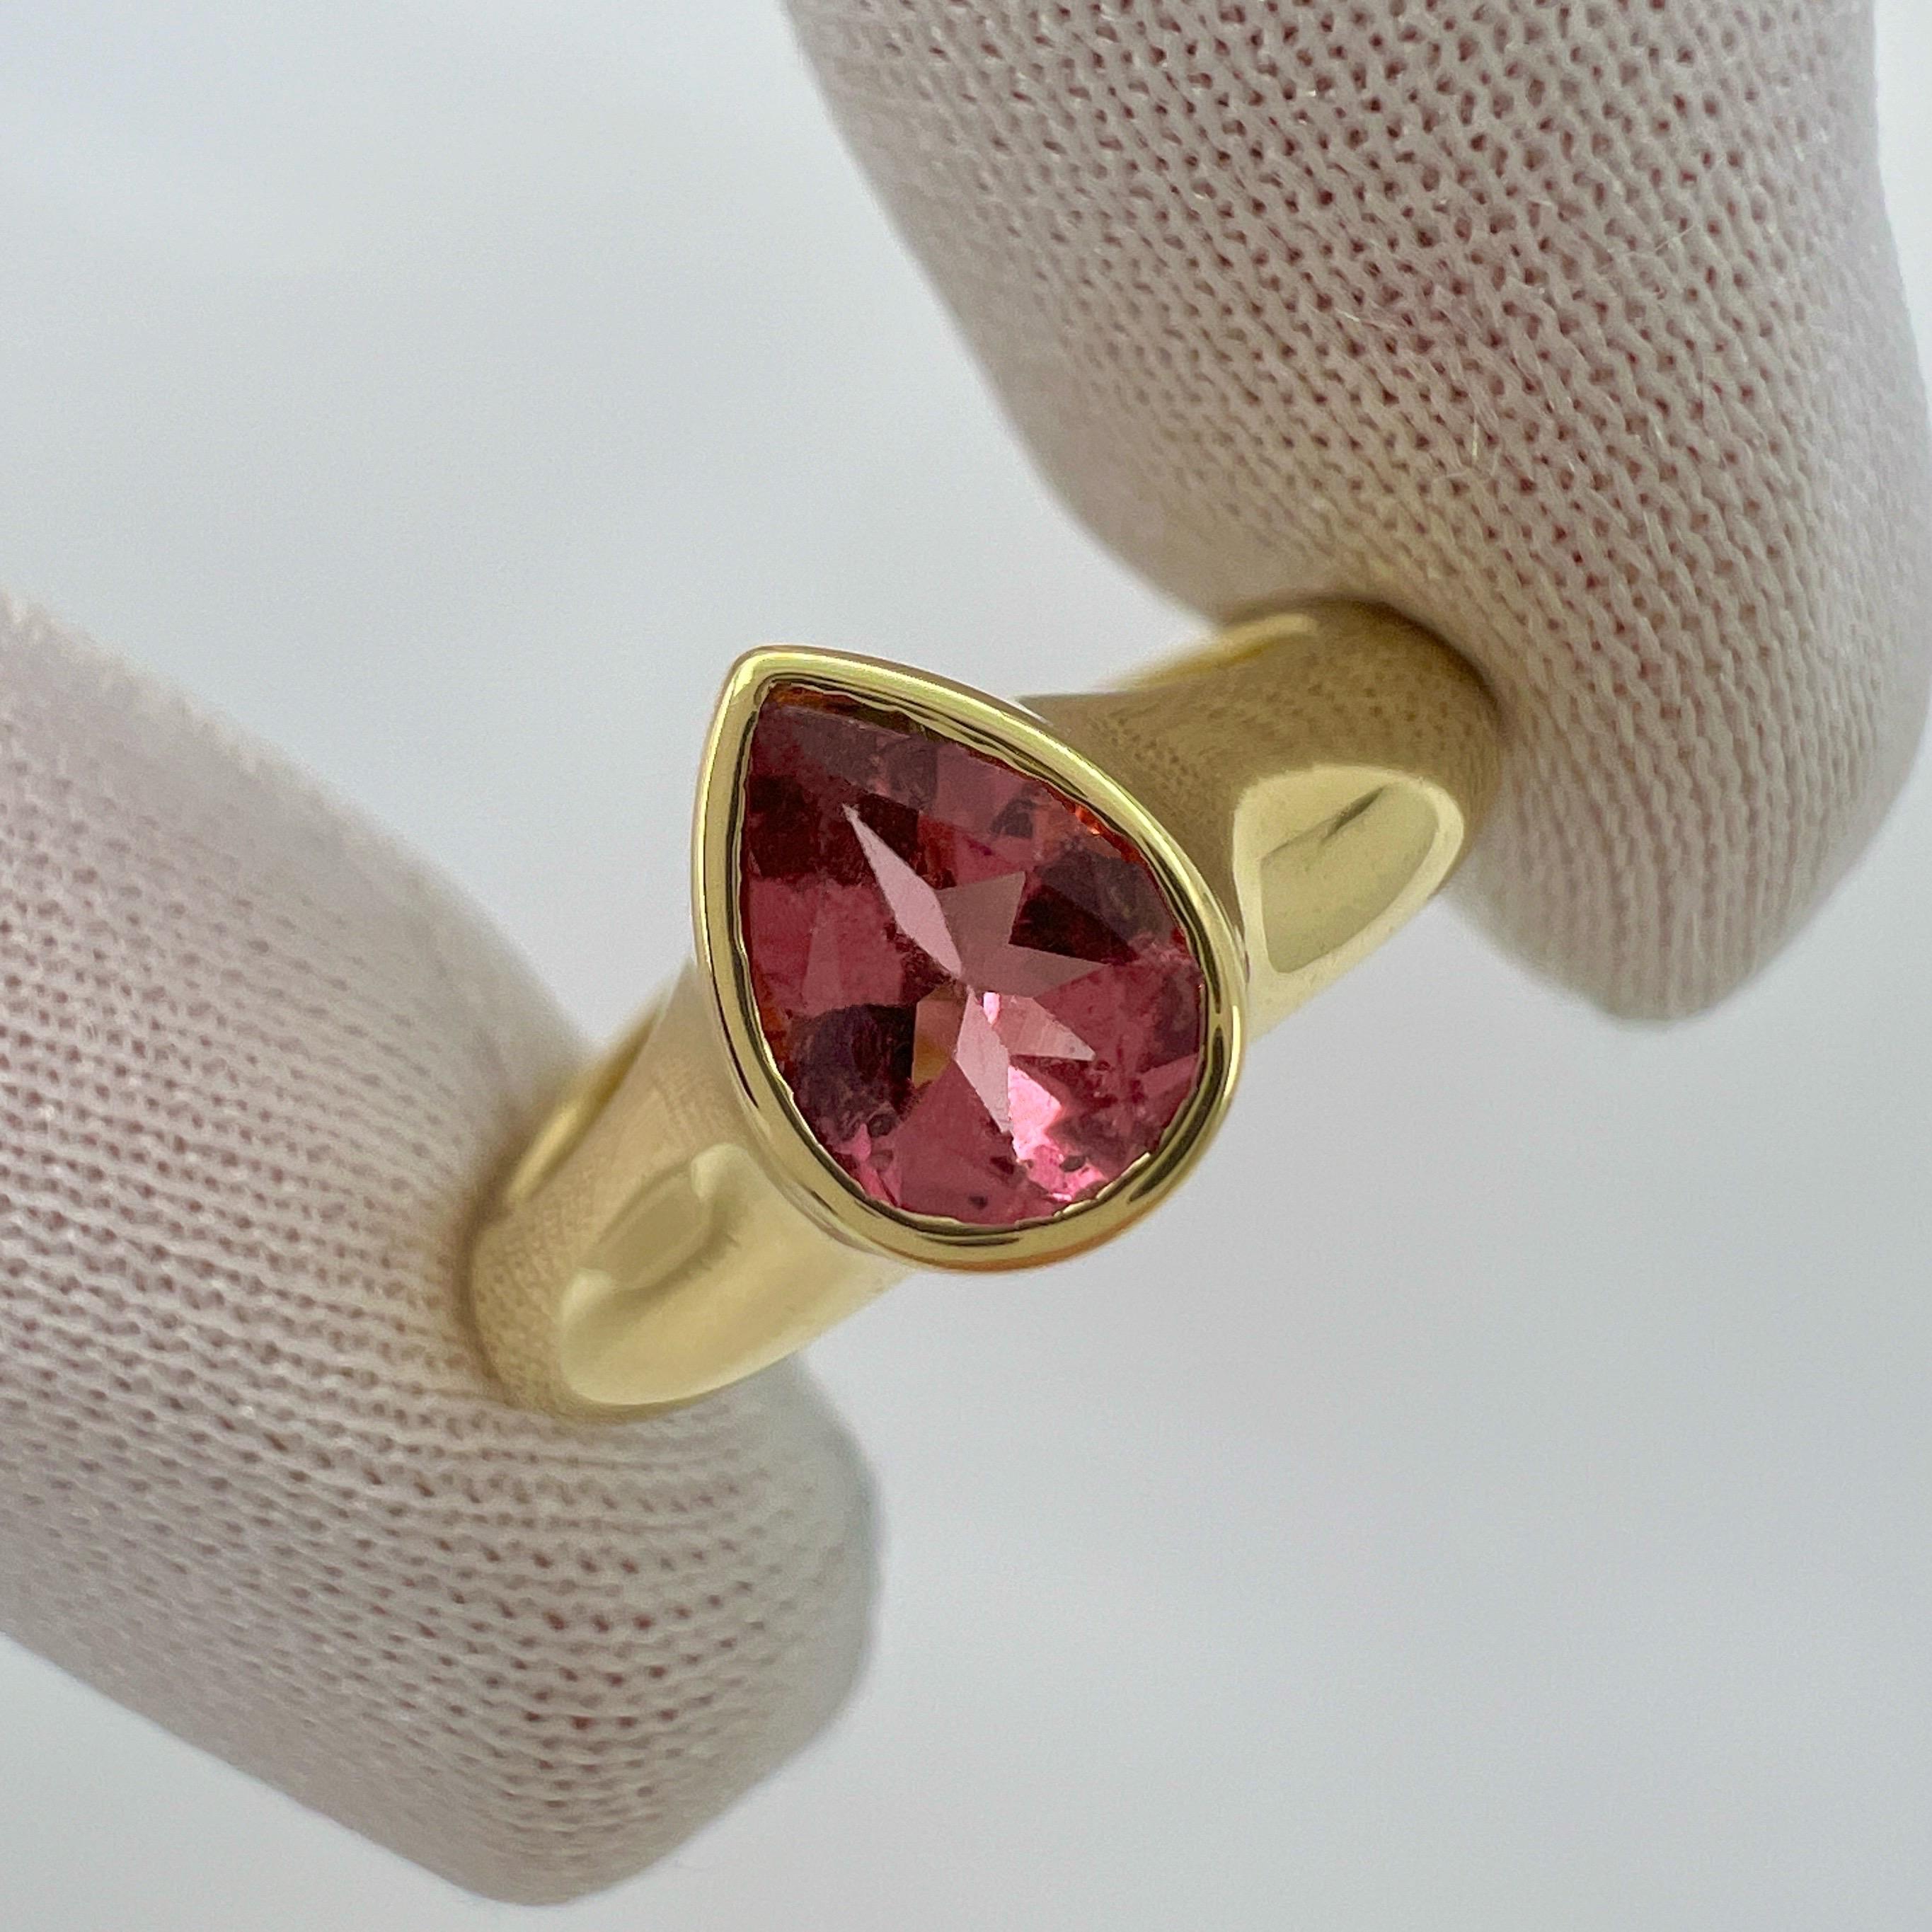 Rare Vintage Van Cleef & Arpels Pink Tourmaline Pear Cut 18k Yellow Gold Ring For Sale 5